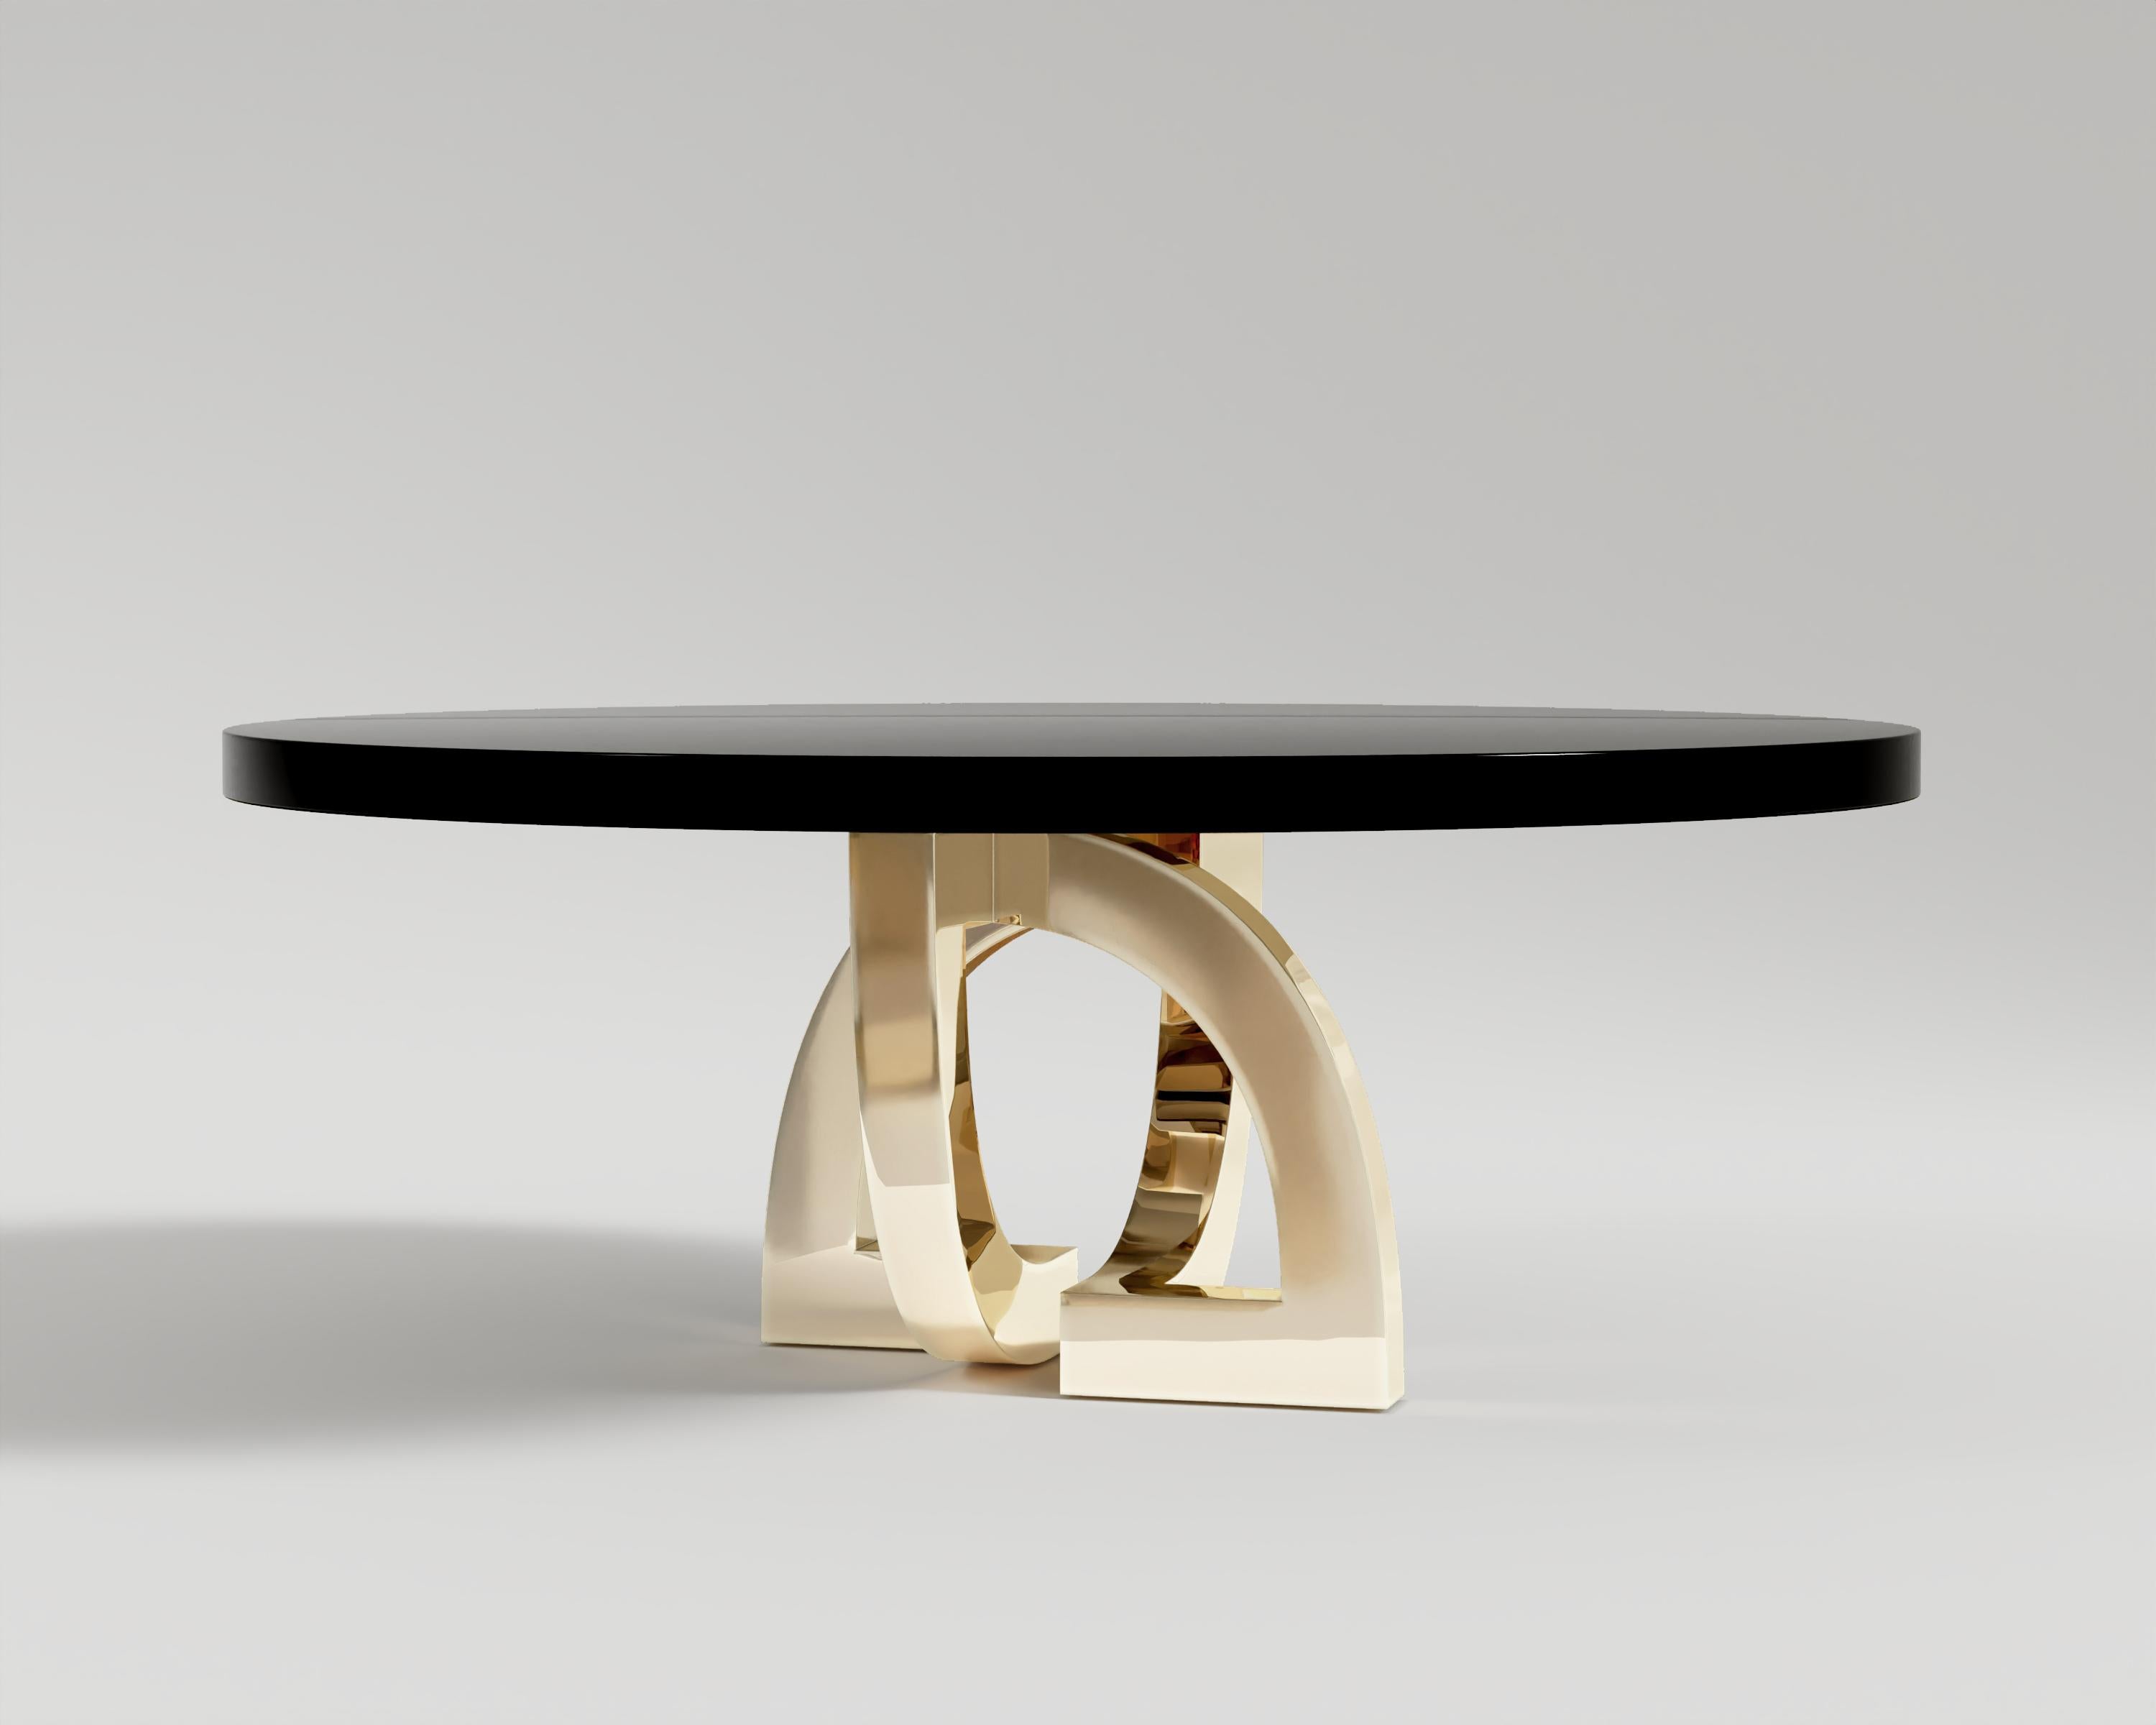 Arco Dining Table
The Arco dining table is more than just a functional piece of furniture. Arco’s centerpiece is its abstract base design, a true work of art that defies convention. The base combines flowing lines and geometric forms, intertwining